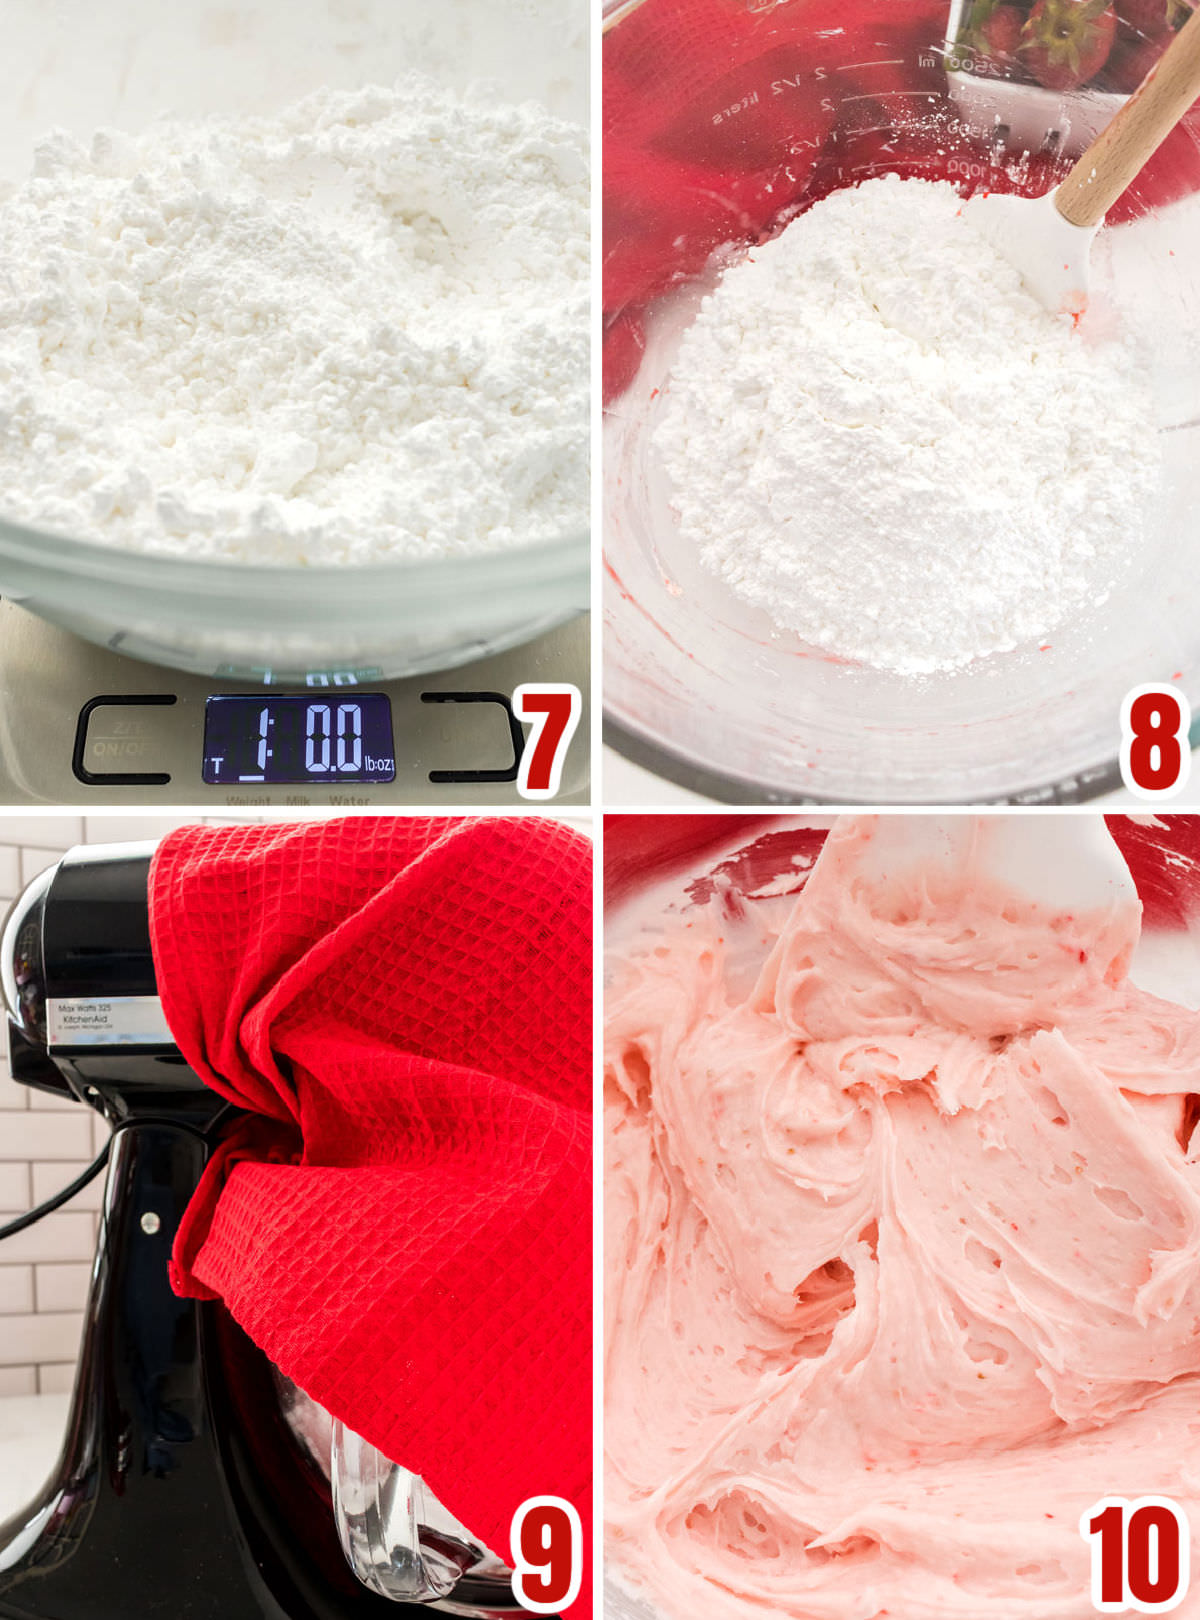 Collage image of the steps necessary to mix the powdered sugar with the butter and strawberry mixture.